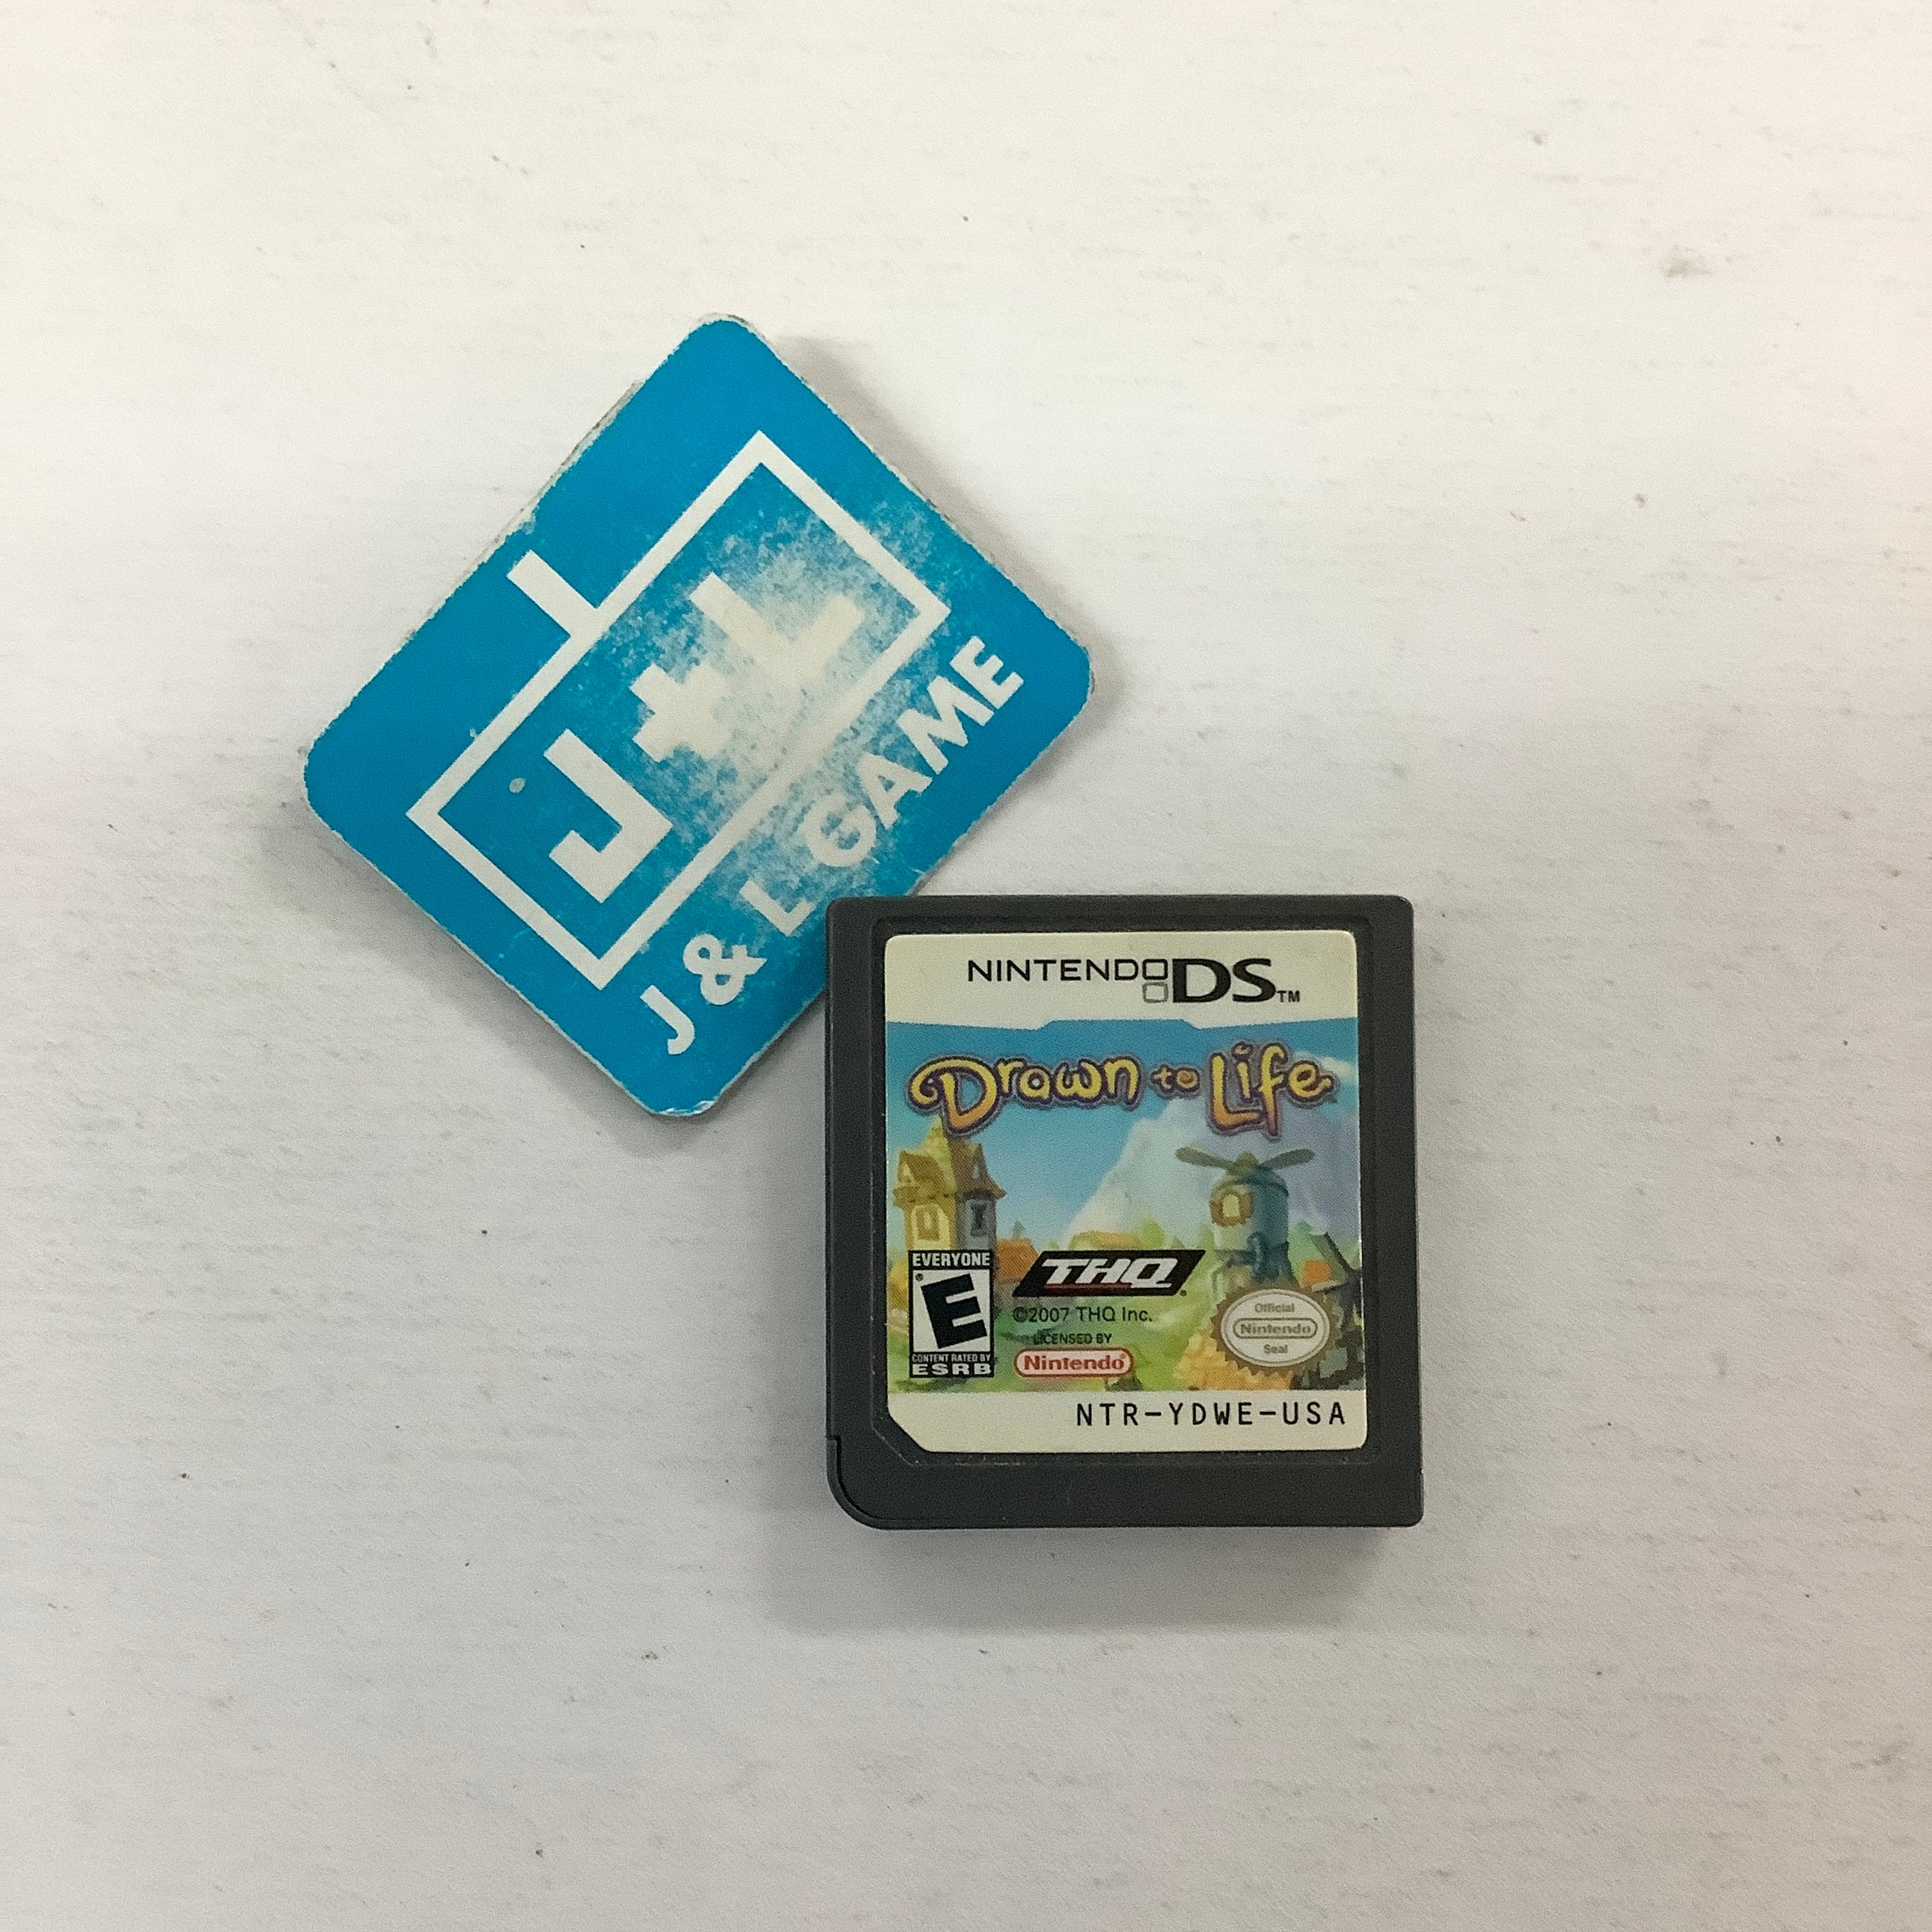 Drawn to Life - (NDS) Nintendo DS [Pre-Owned] Video Games THQ   